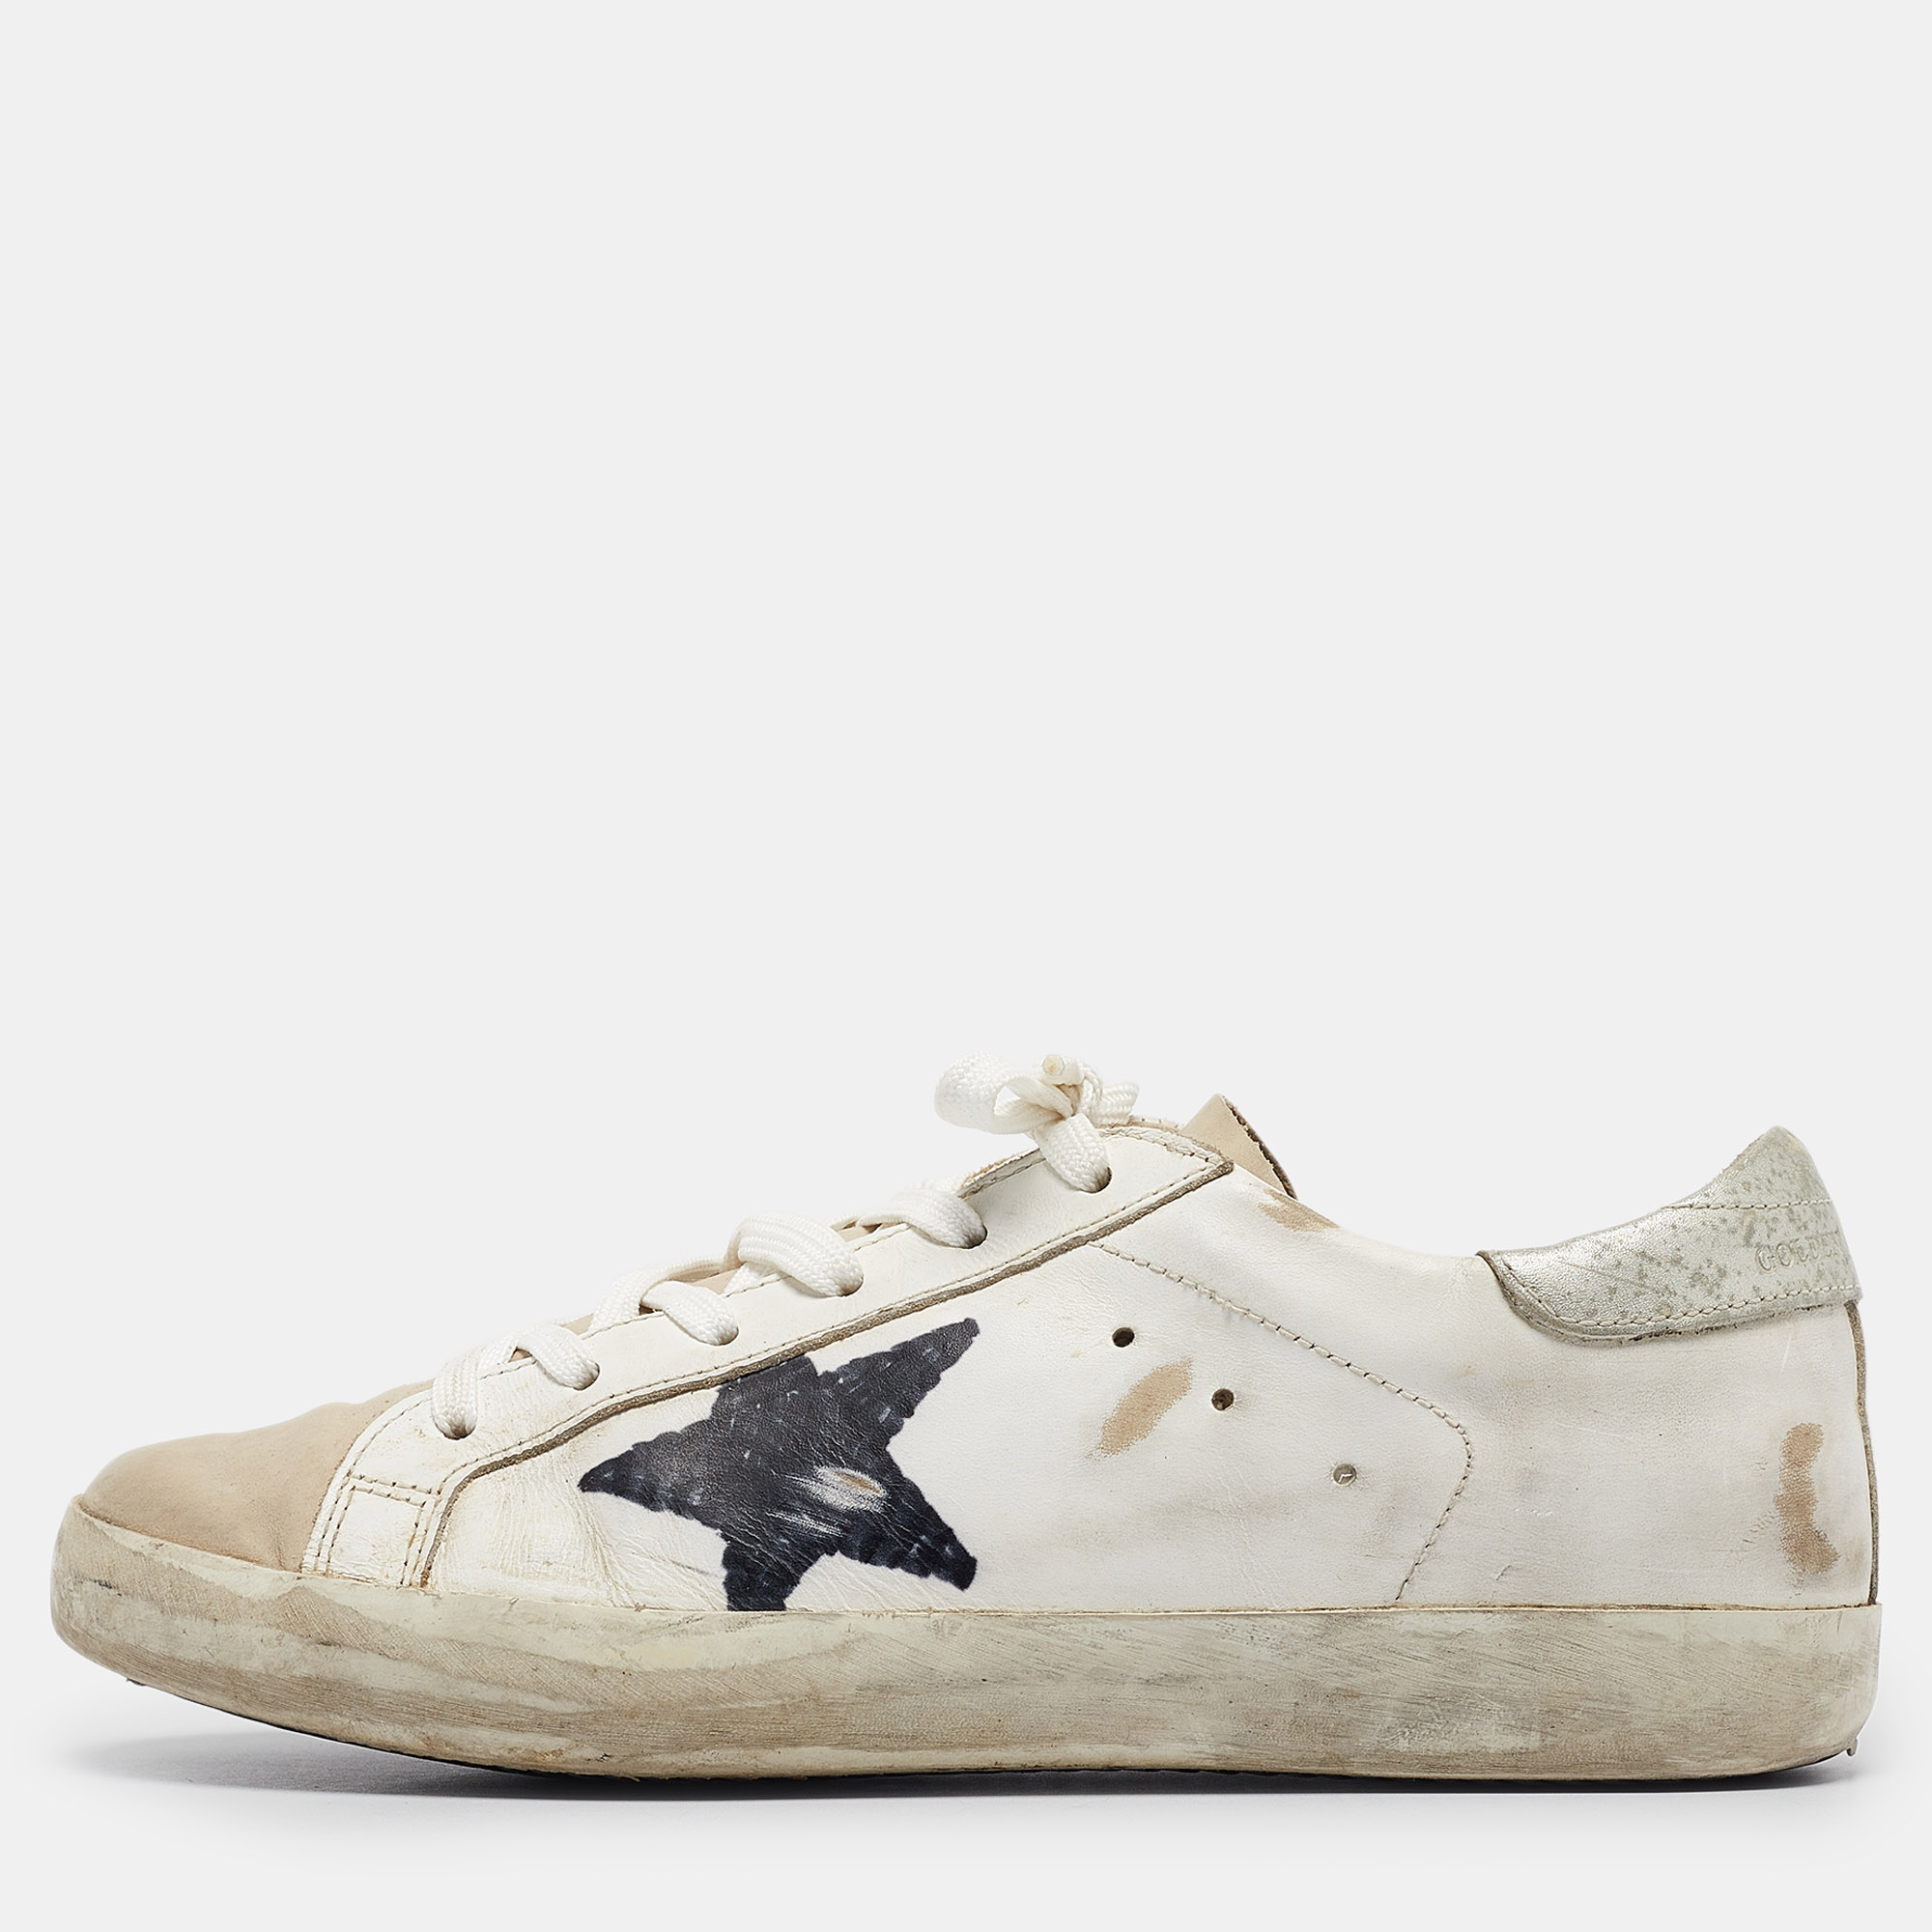 

Golden Goose White Leather and Nubuck Superstar Sneakers Size